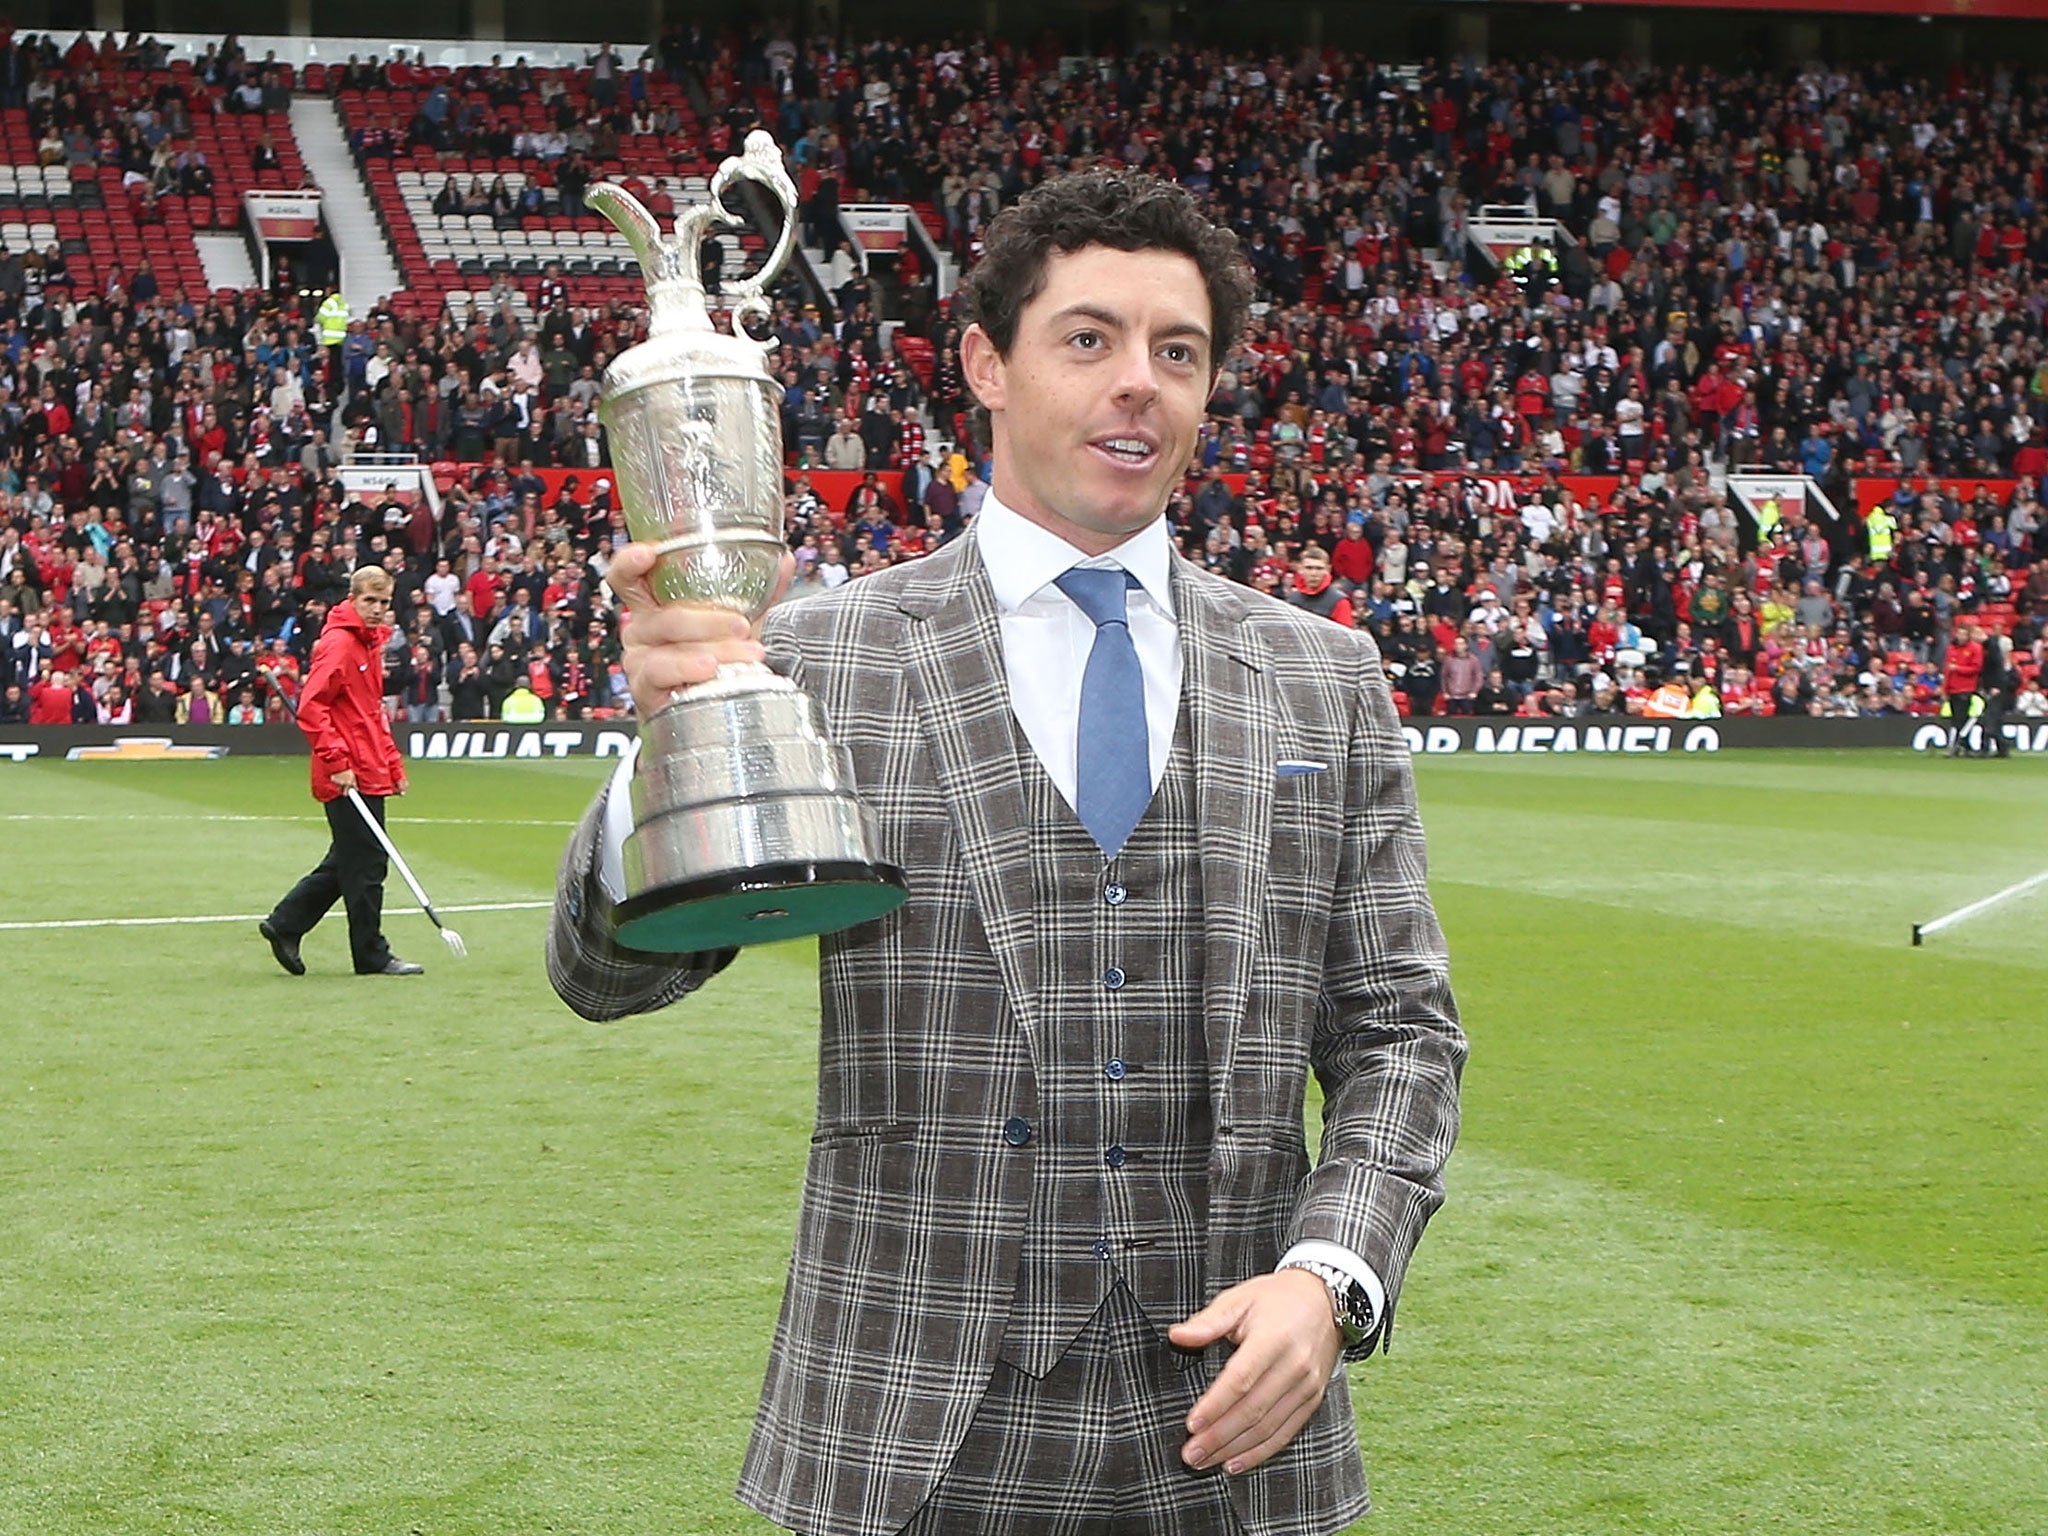 Rory McIlroy parades The Open Championship trophy around Old Trafford